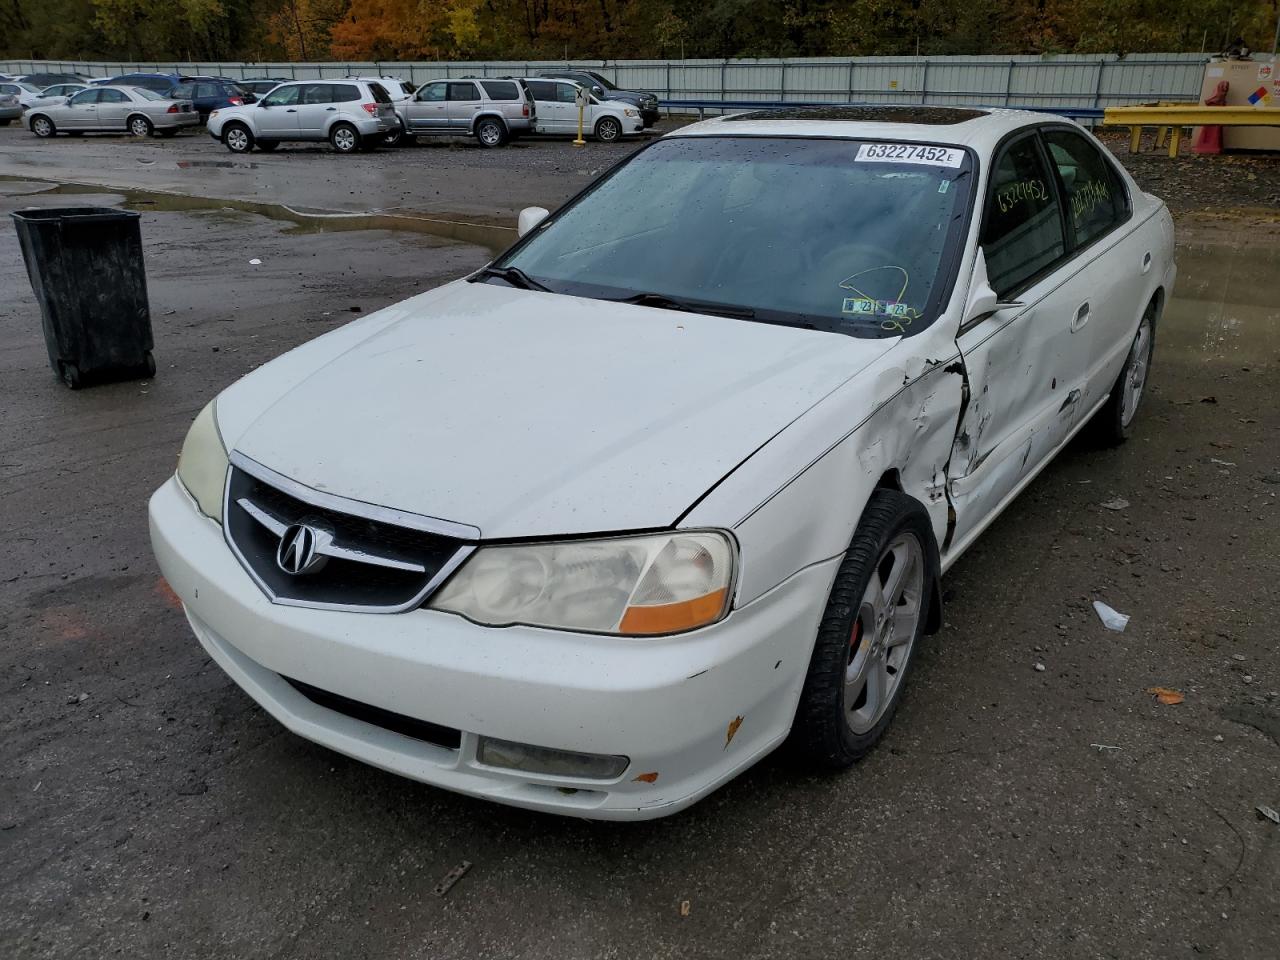 2003 ACURA 3.2TL TYPE-S VIN: 19UUA56863A068294